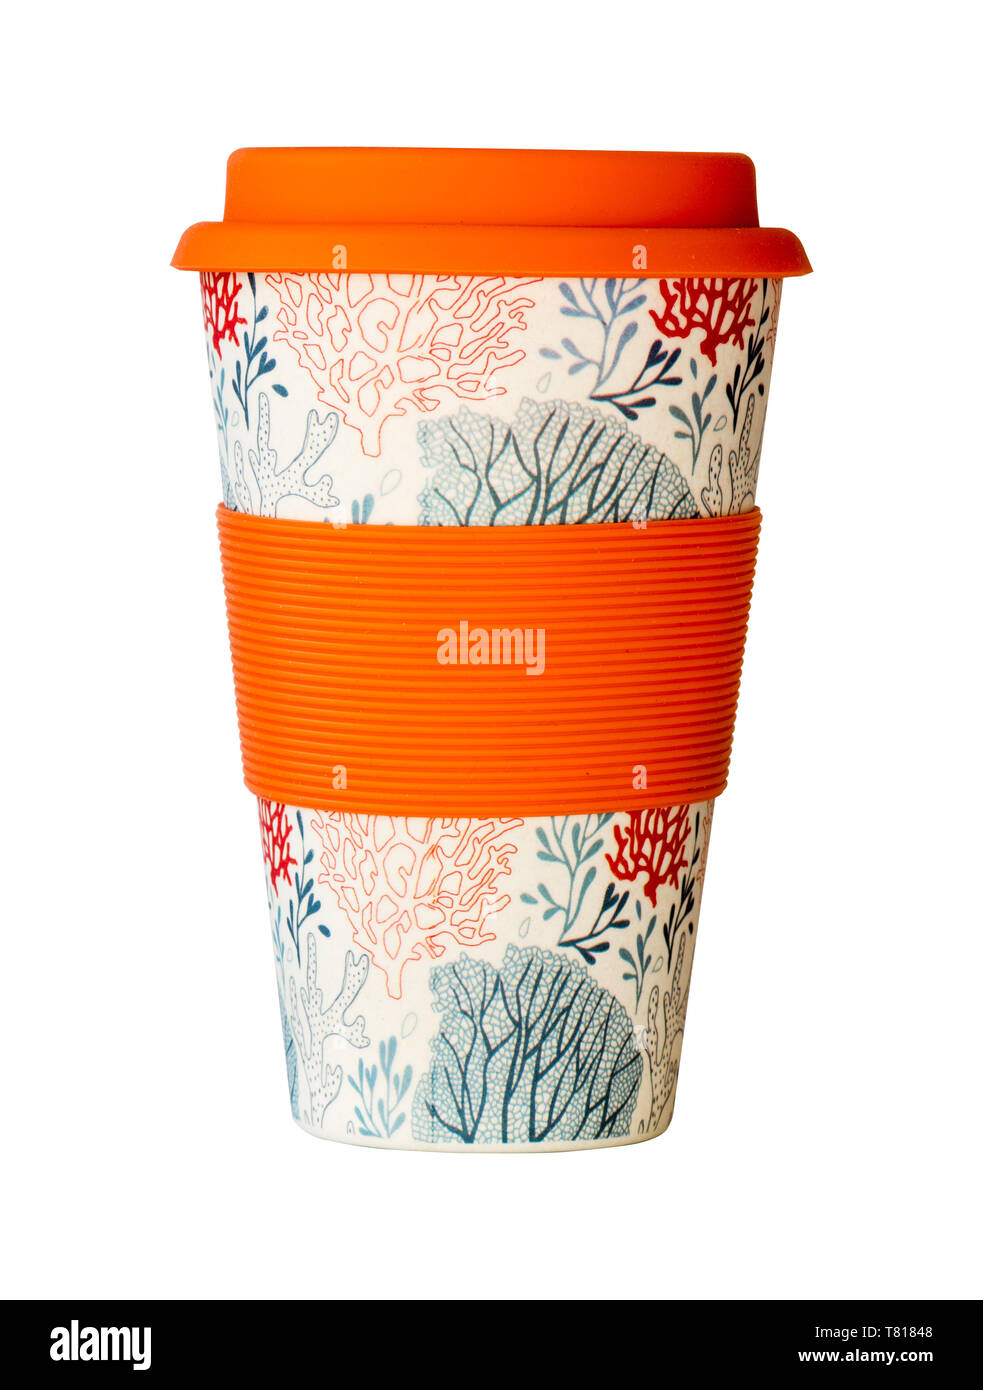 https://c8.alamy.com/comp/T81848/reuse-coffee-cup-made-from-bamboo-pulp-with-silicon-sleeve-and-silicone-lid-T81848.jpg